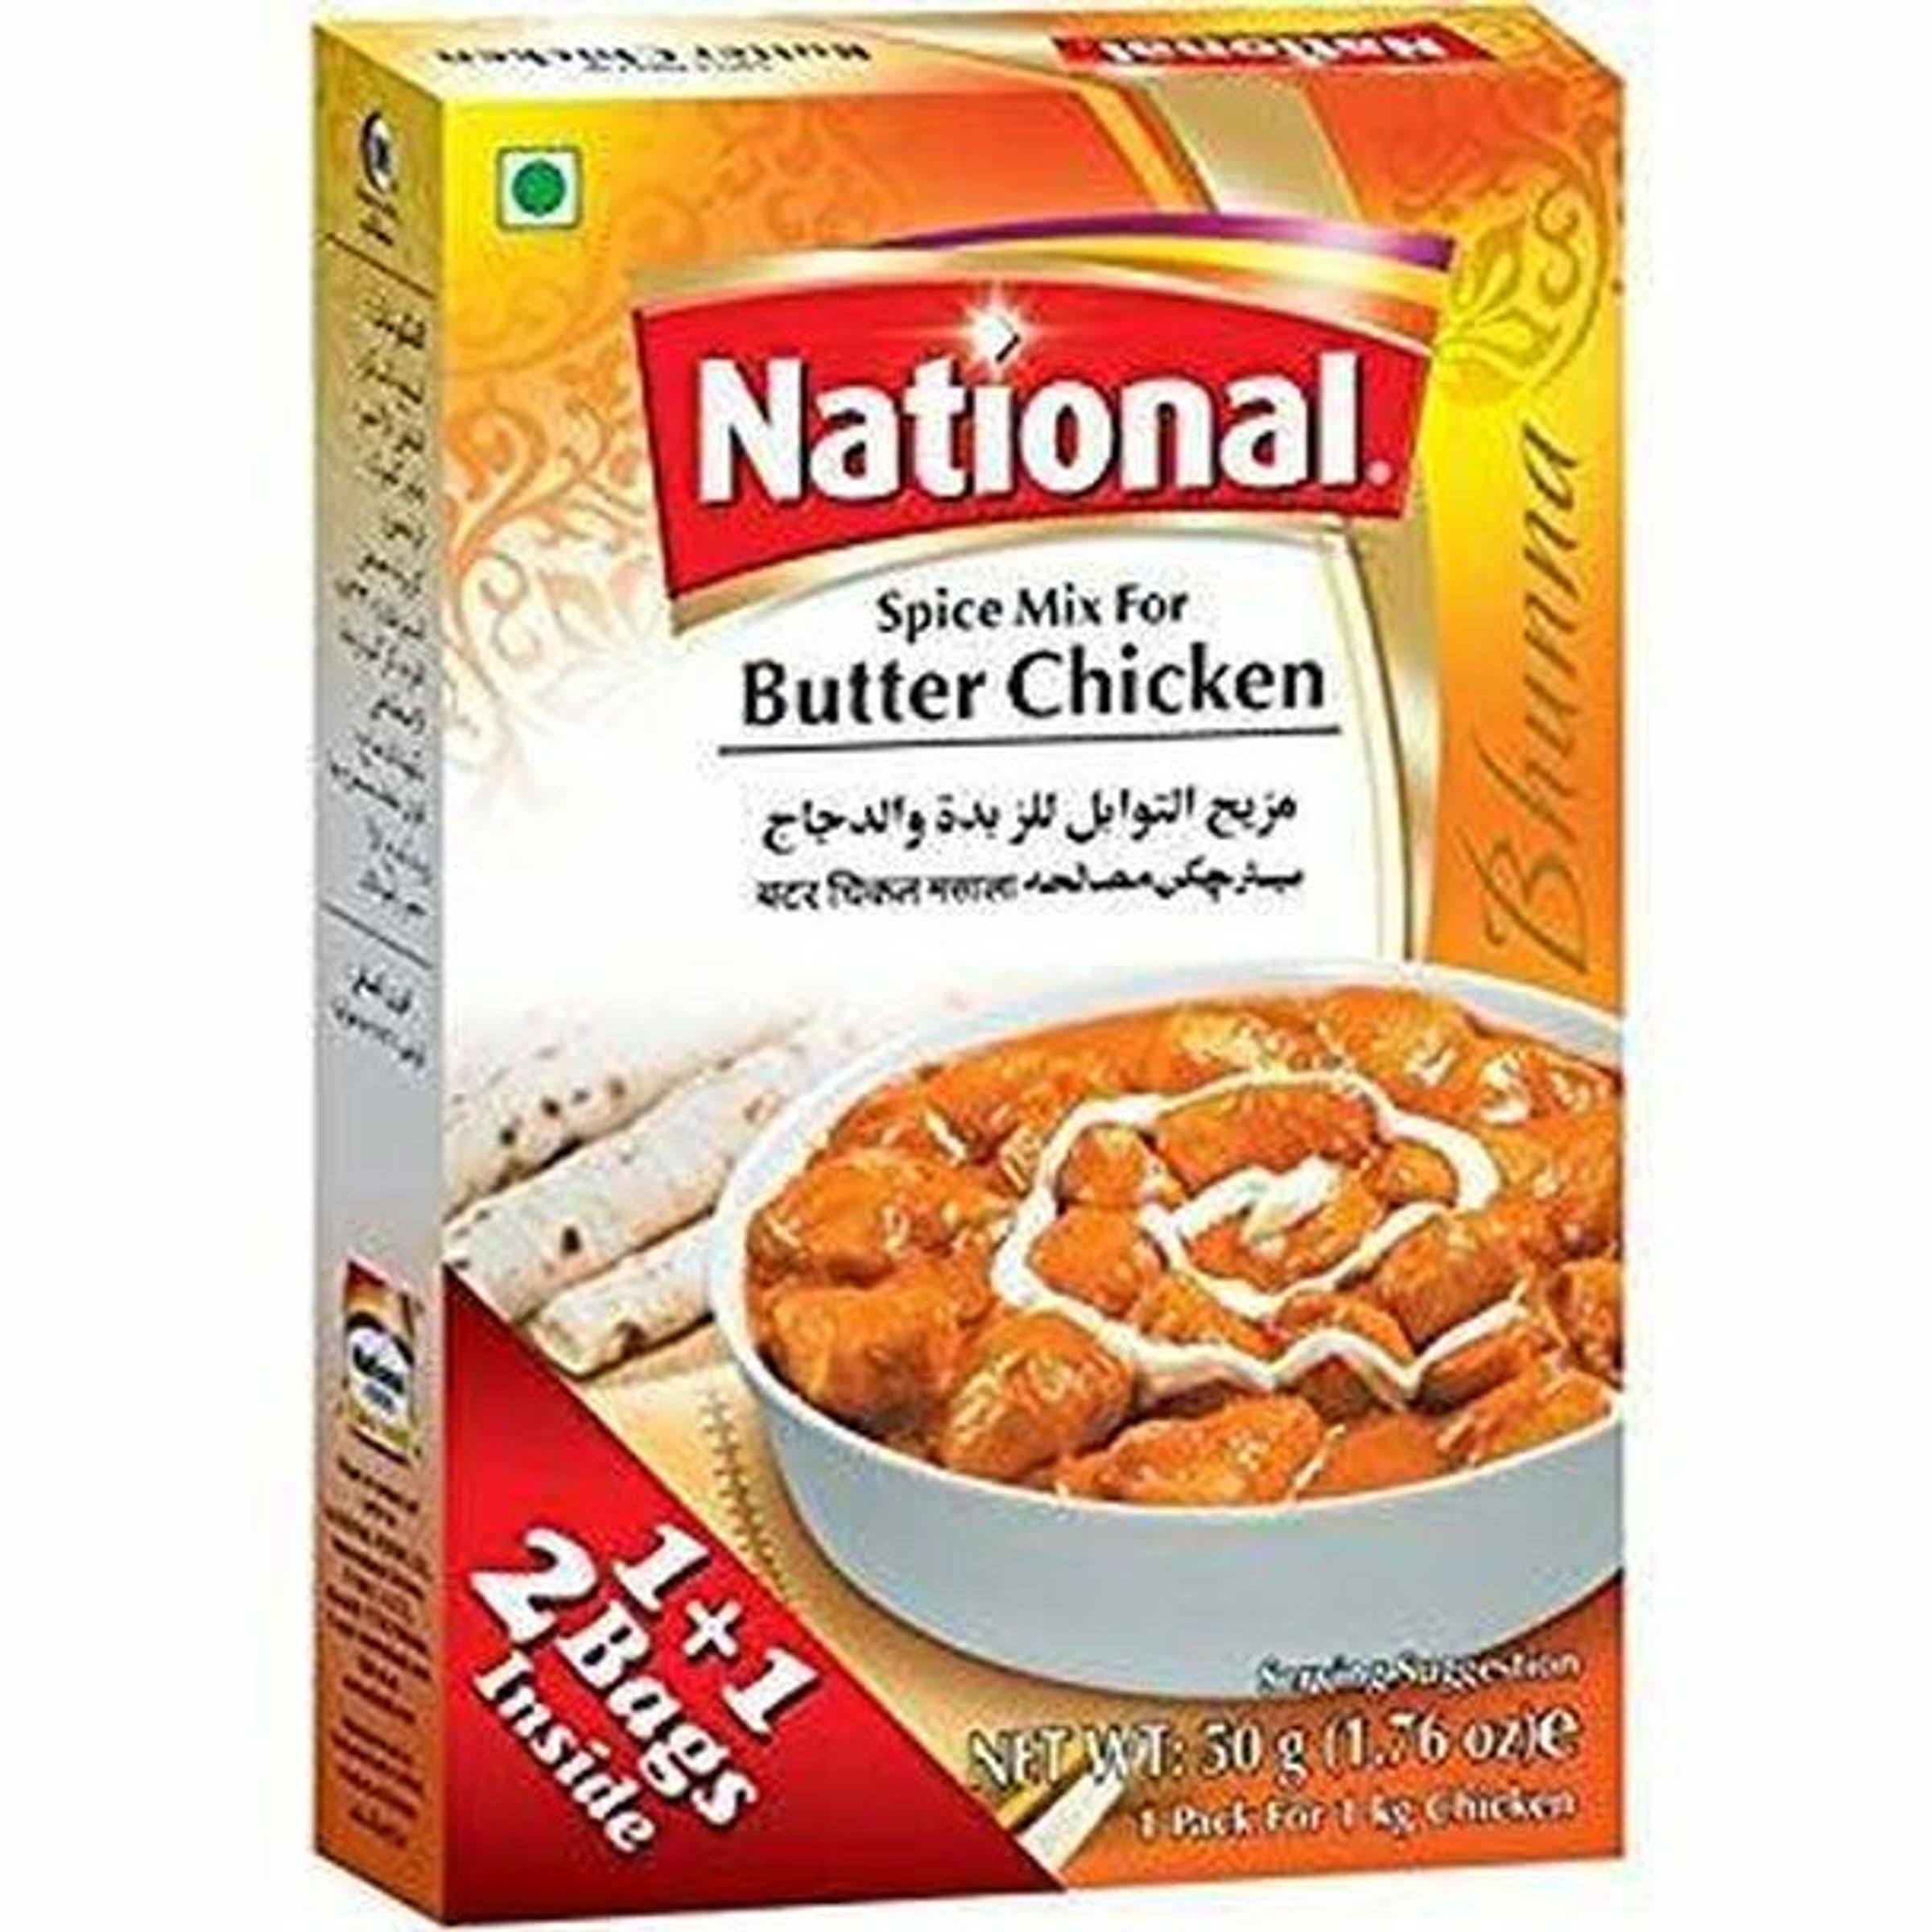 National Spice Mix for Butter Chicken